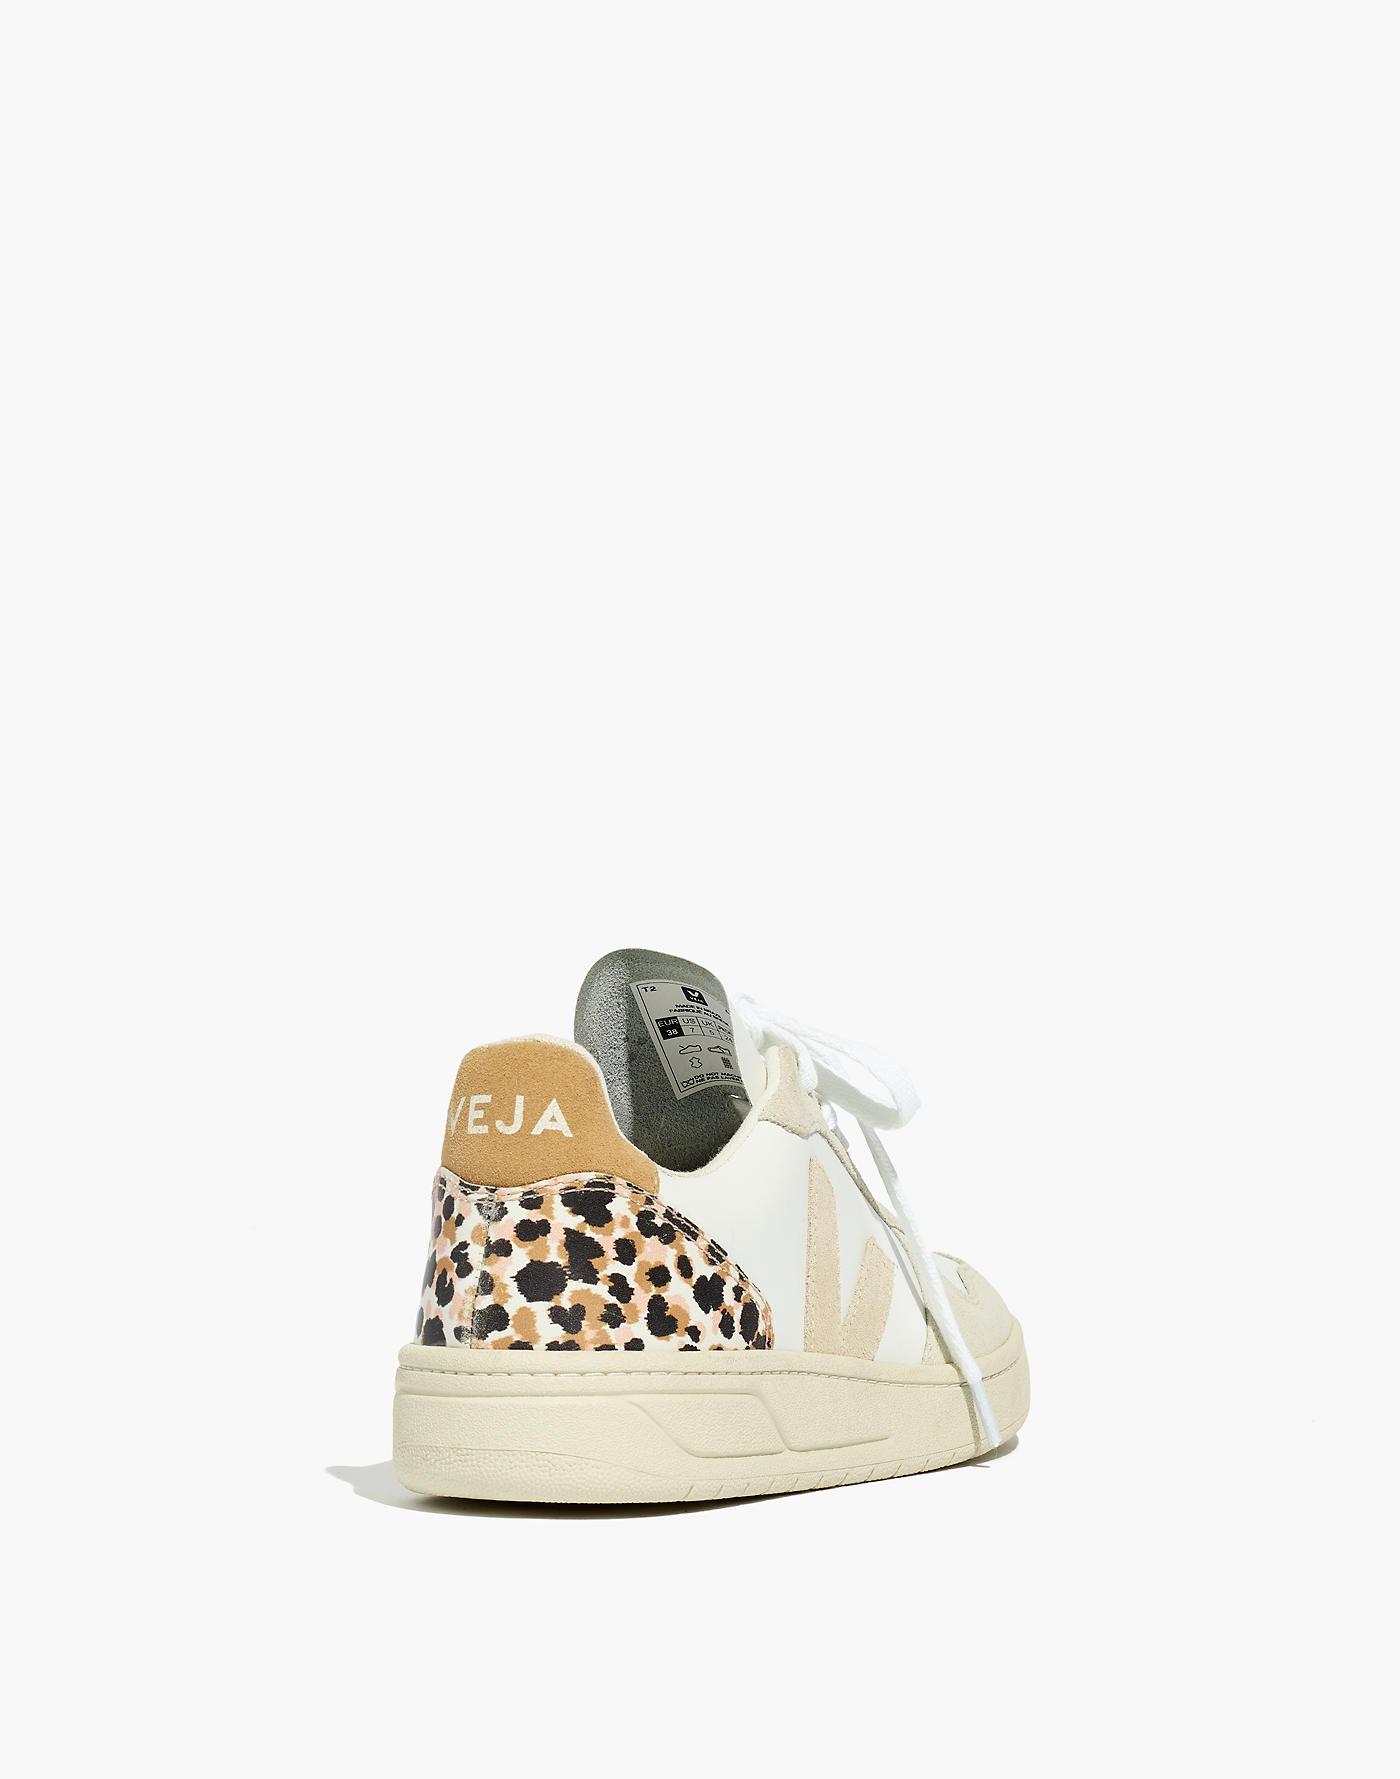 MW Madewell X Vejatm V-10 Sneakers In Animal Print Leather | Lyst